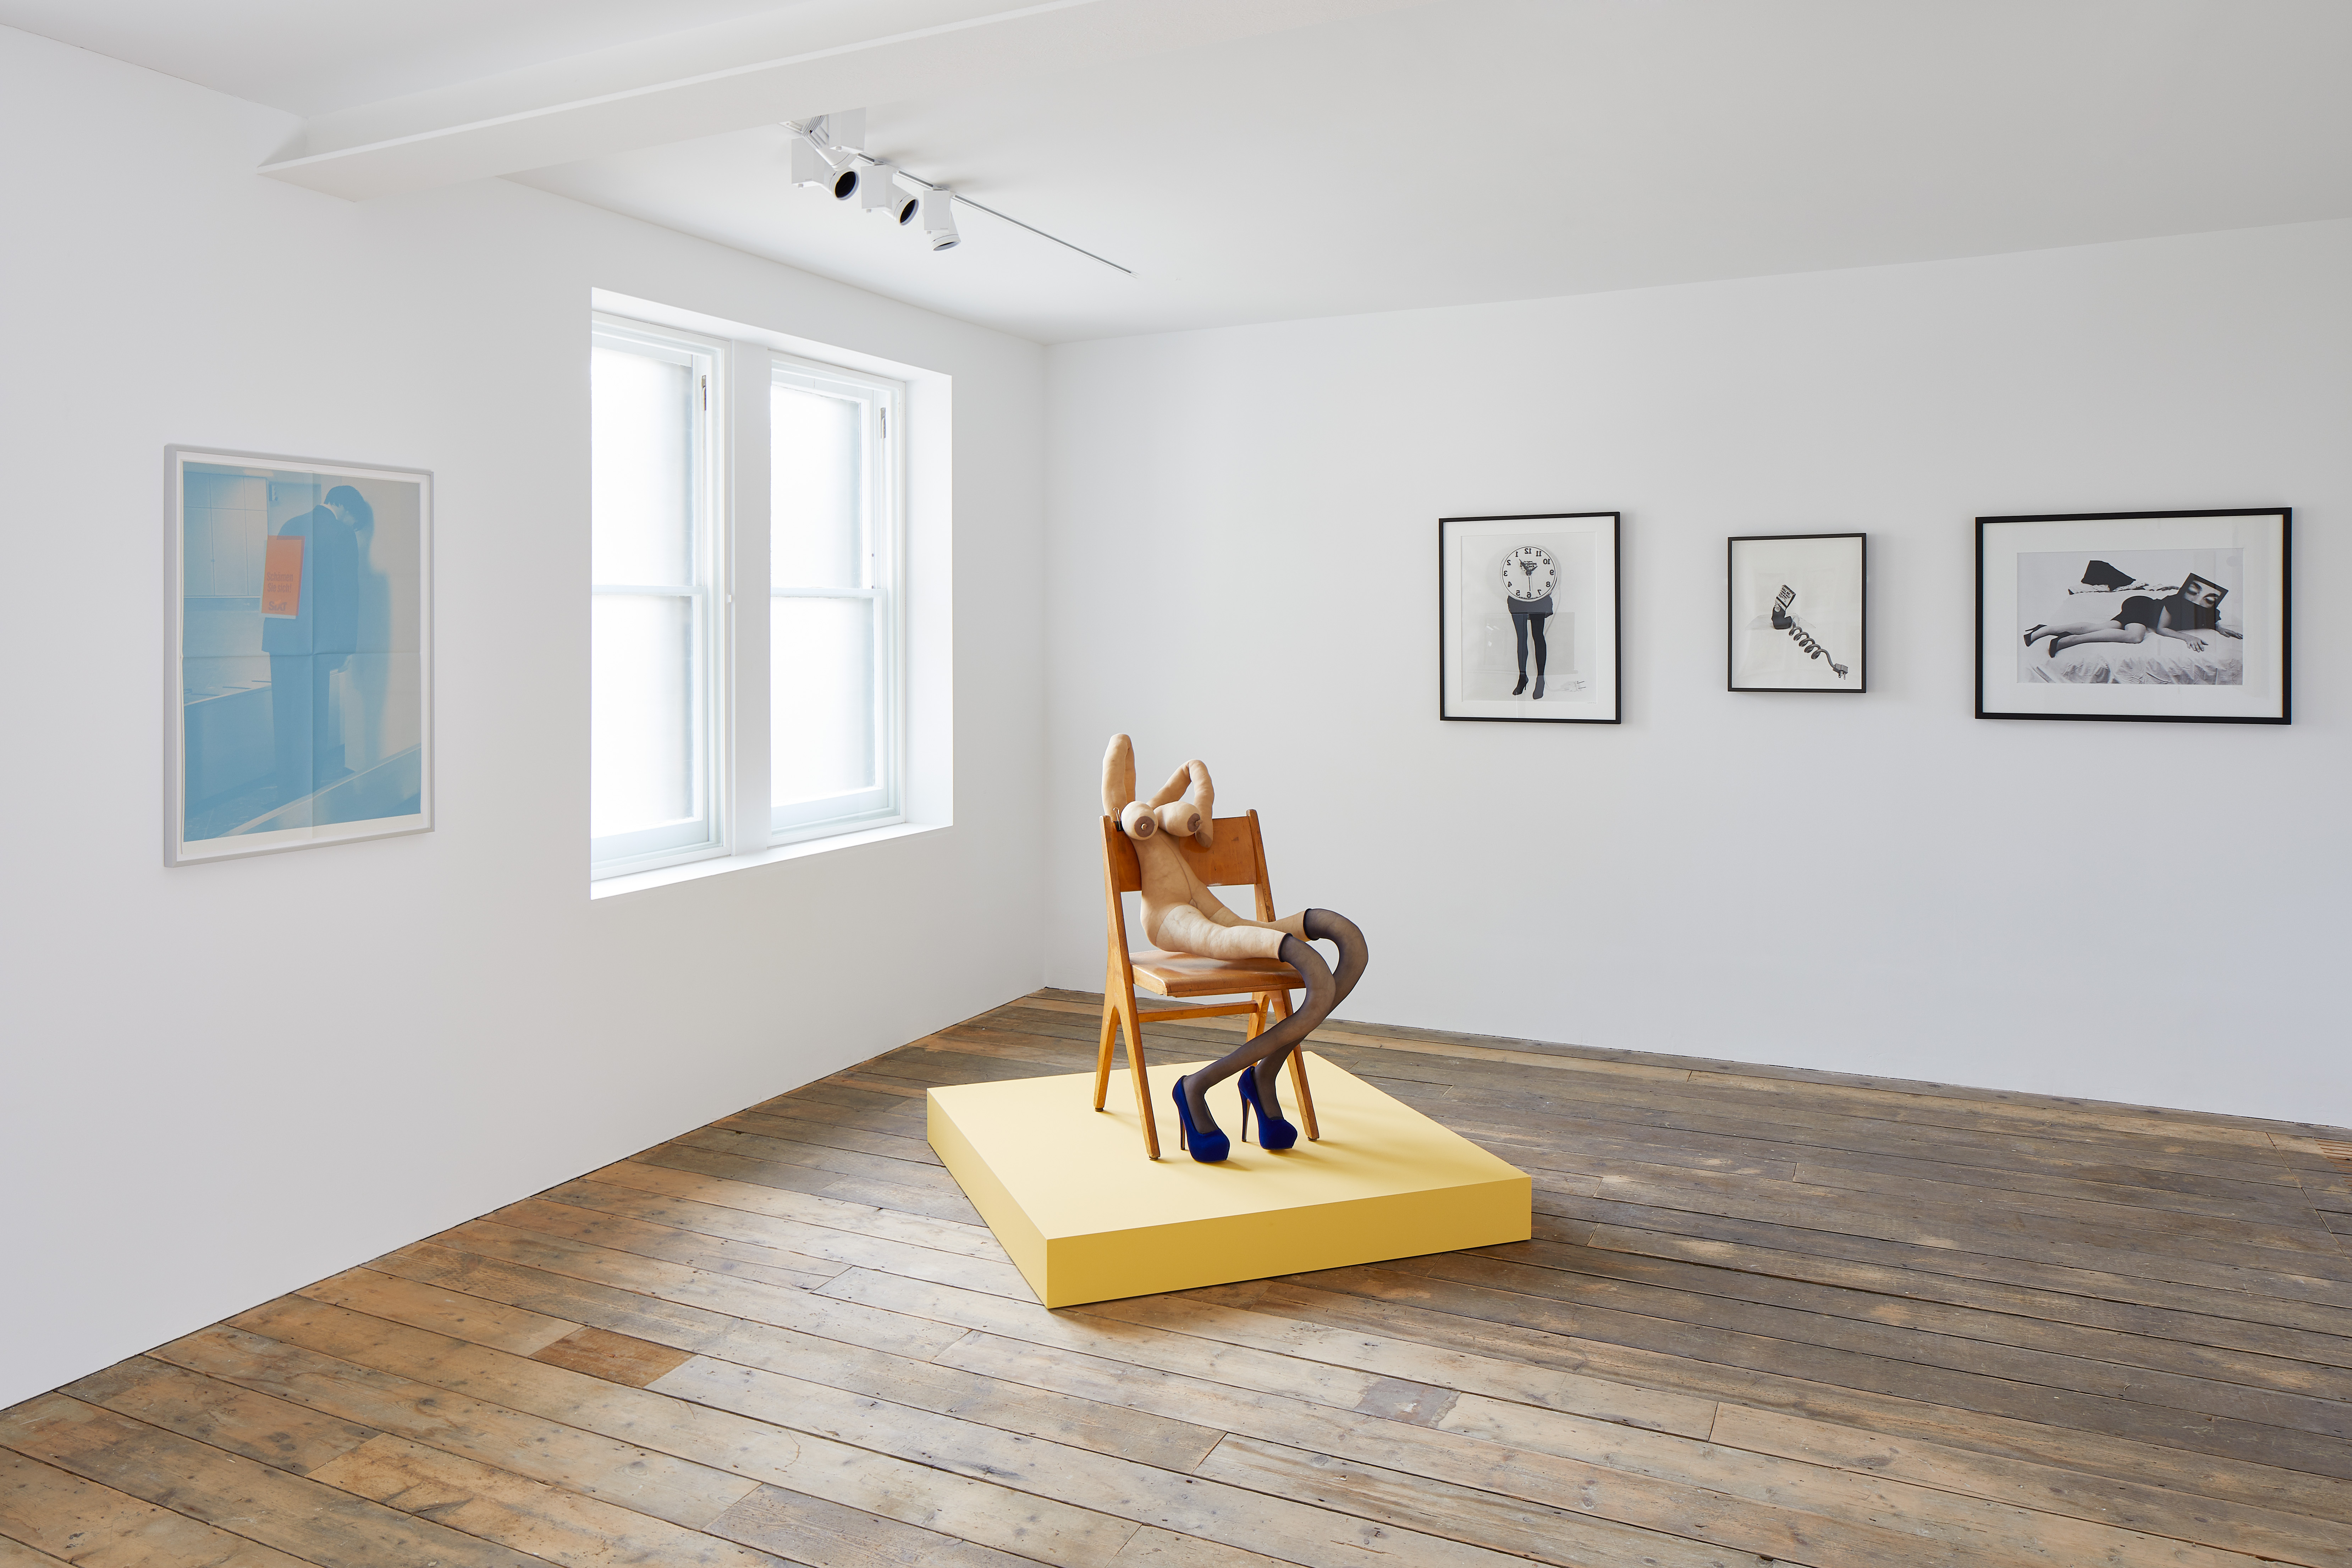 Installation view of KNOCK KNOCK. Pictured: Campaign Volunteer (2018) by Rosemarie Trockel, Yves (2018) by Sarah Lucas and Biological Clock 2 (1995), Call Me (1987) and Seduction (1985) by Lynn Hershman Leeson, Photo: Andy Stagg